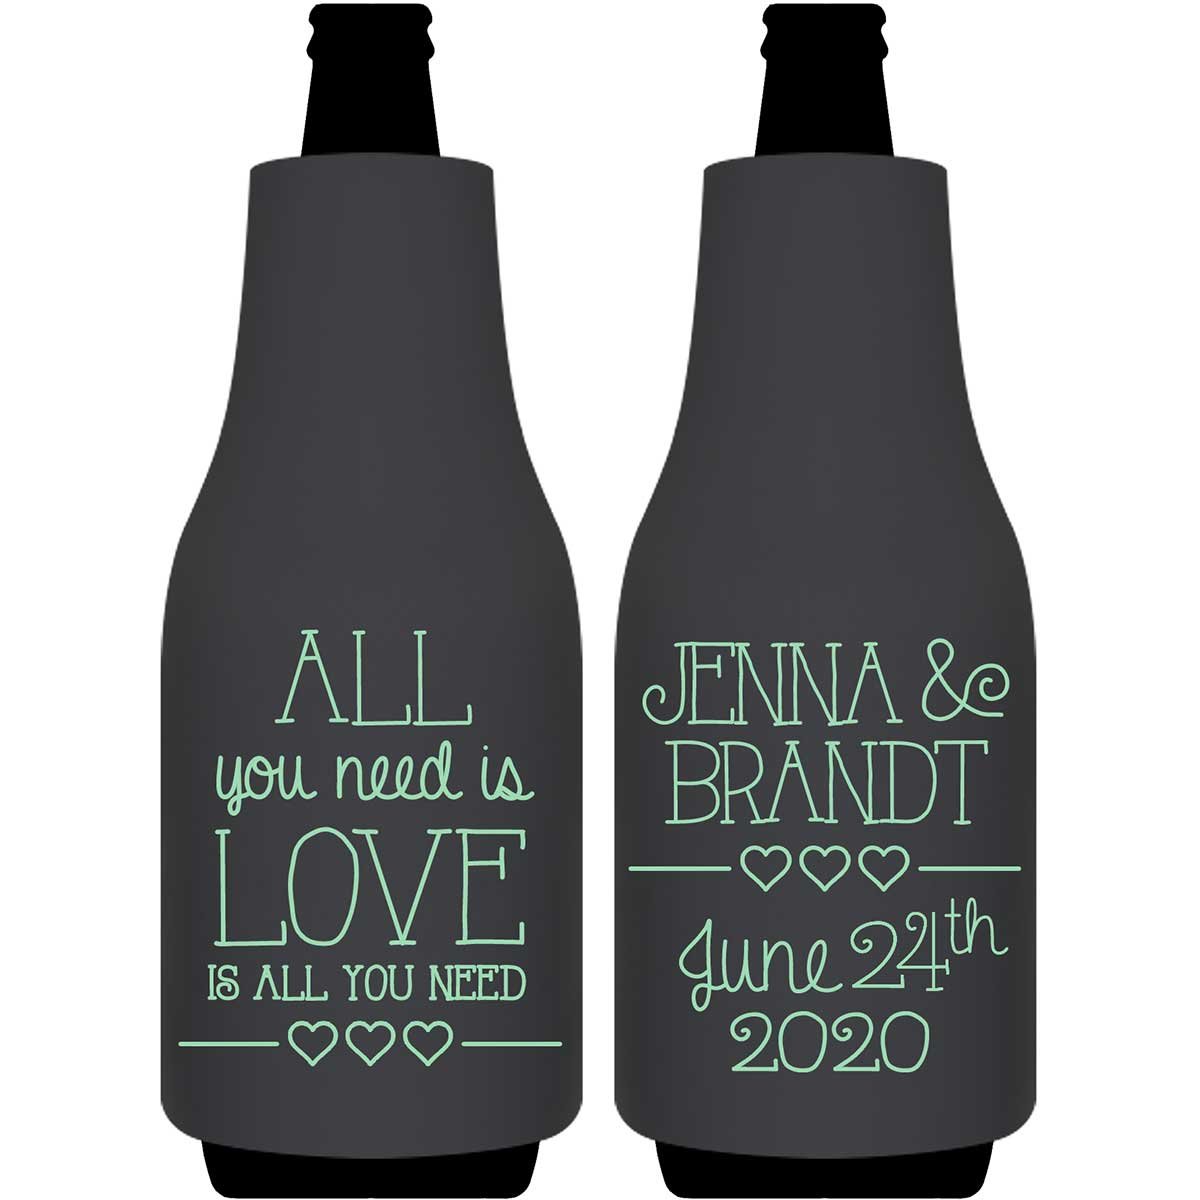 All You Need Is Love Is All You Need 3A Foldable Bottle Sleeve Koozies Wedding Gifts for Guests